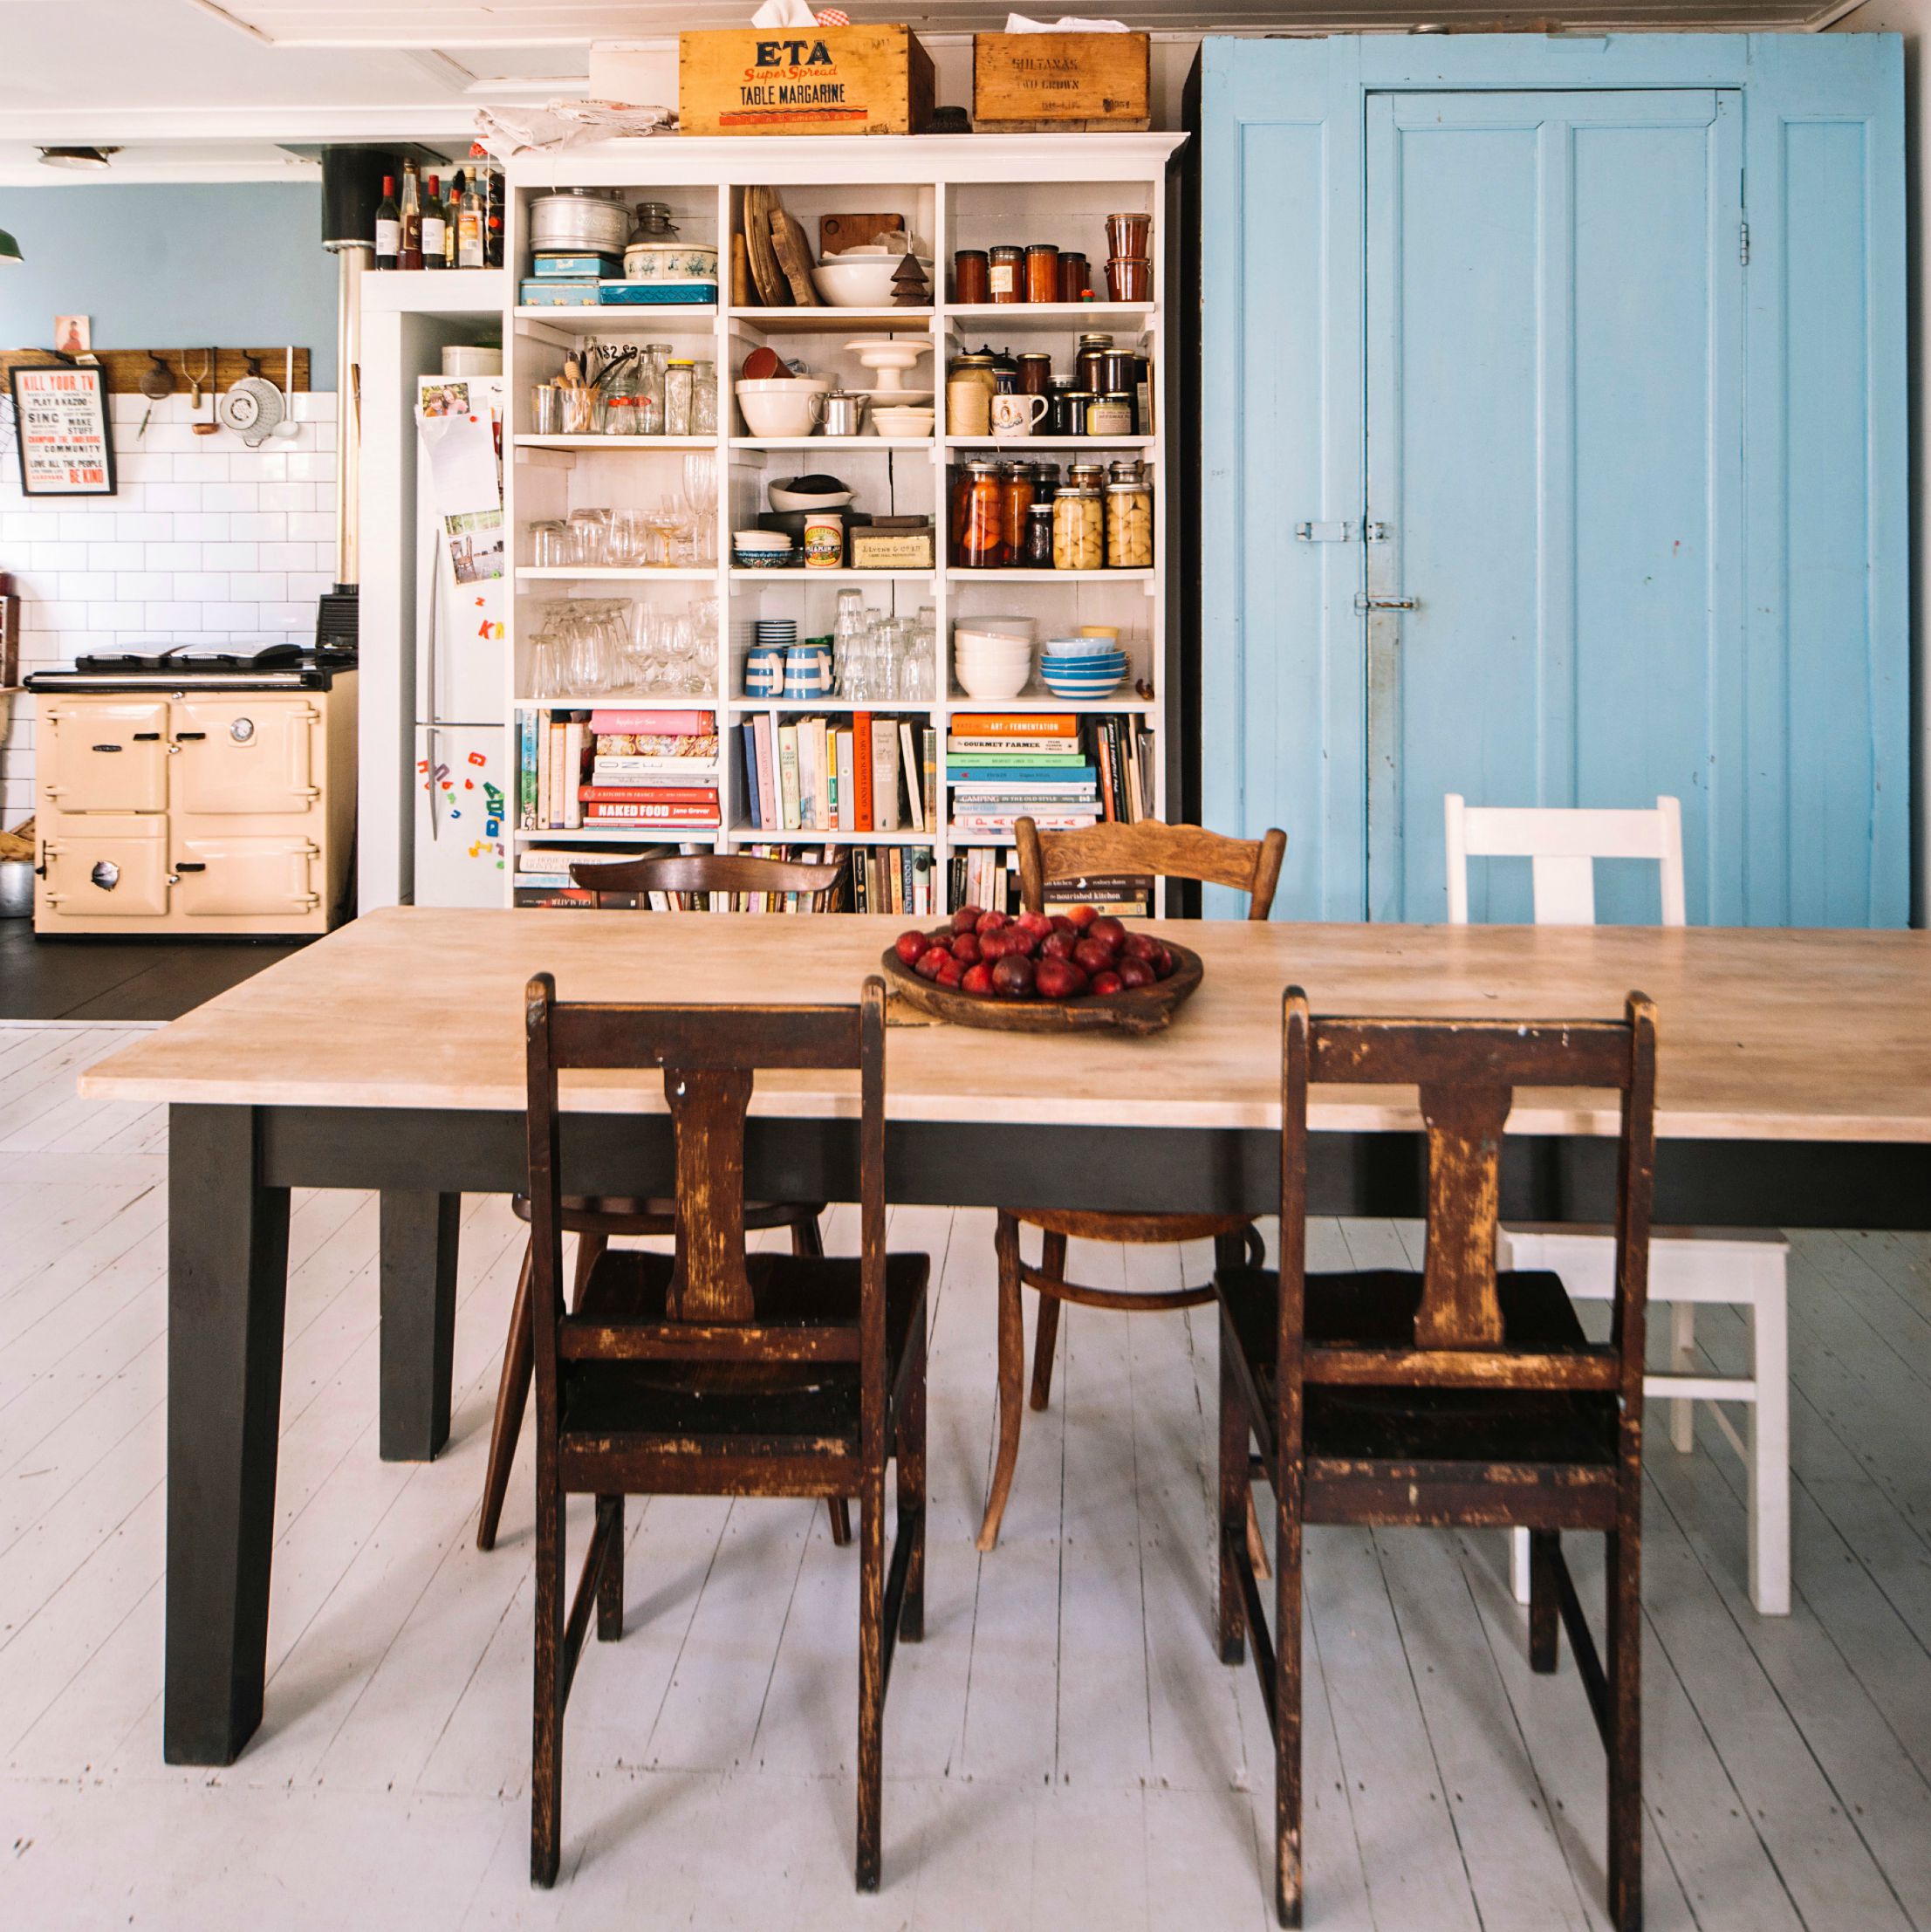 How to make the most out of your kitchen space